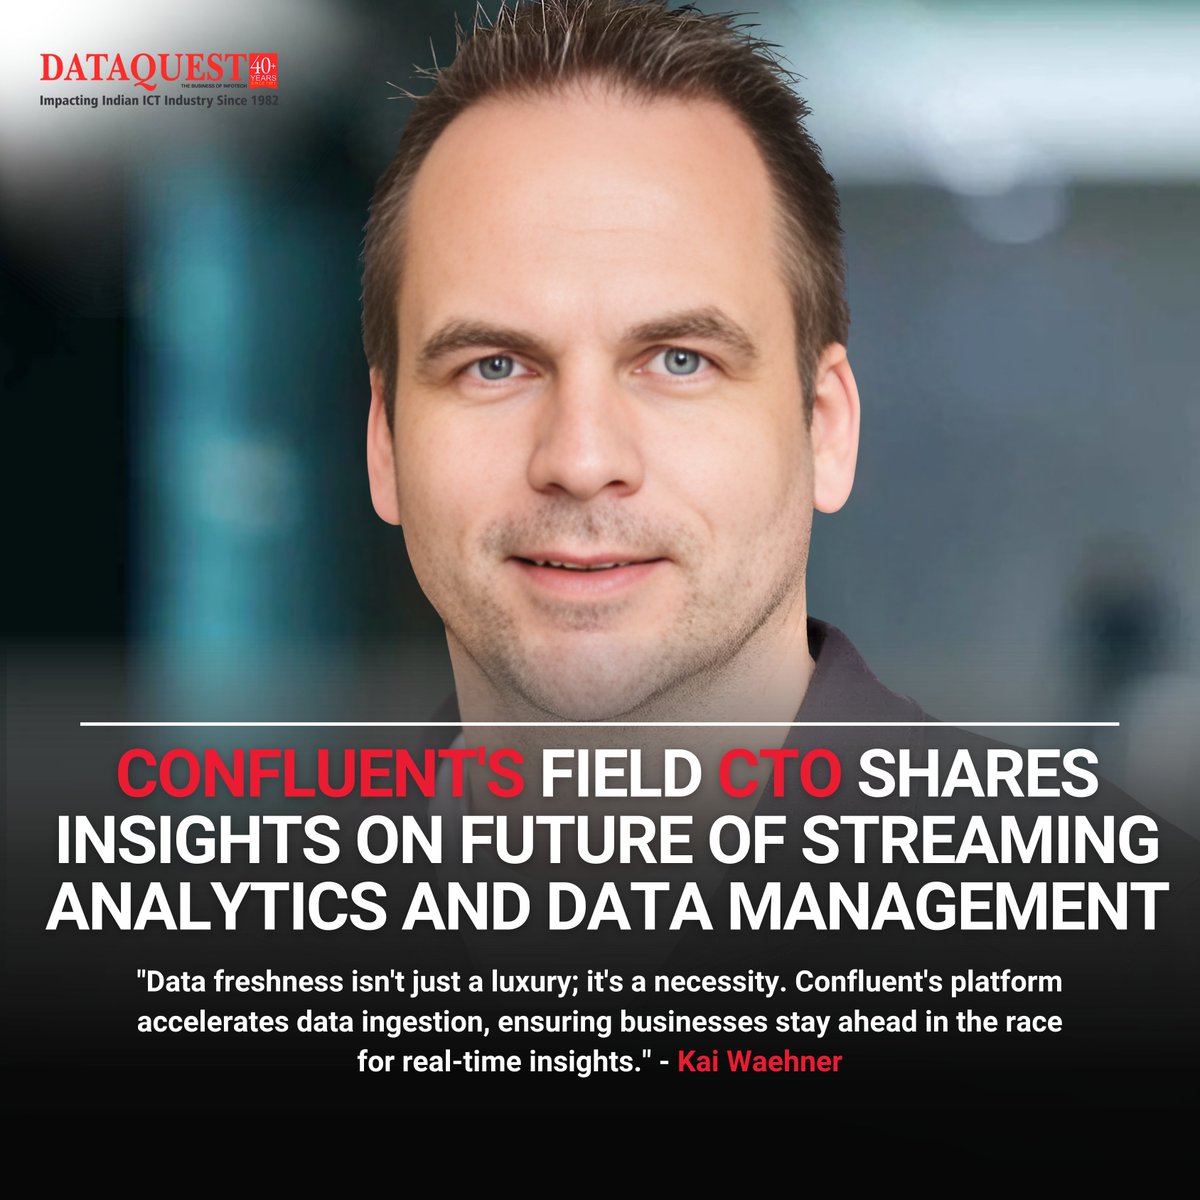 Confluent's Field CTO, Kai Waehner, shares insights on the future of streaming analytics and data management, highlighting the importance of reliable data flow, collaboration, and security.

Read the full interview: dqindia.com/interview/conf…

#StreamingAnalytics #DataManagement